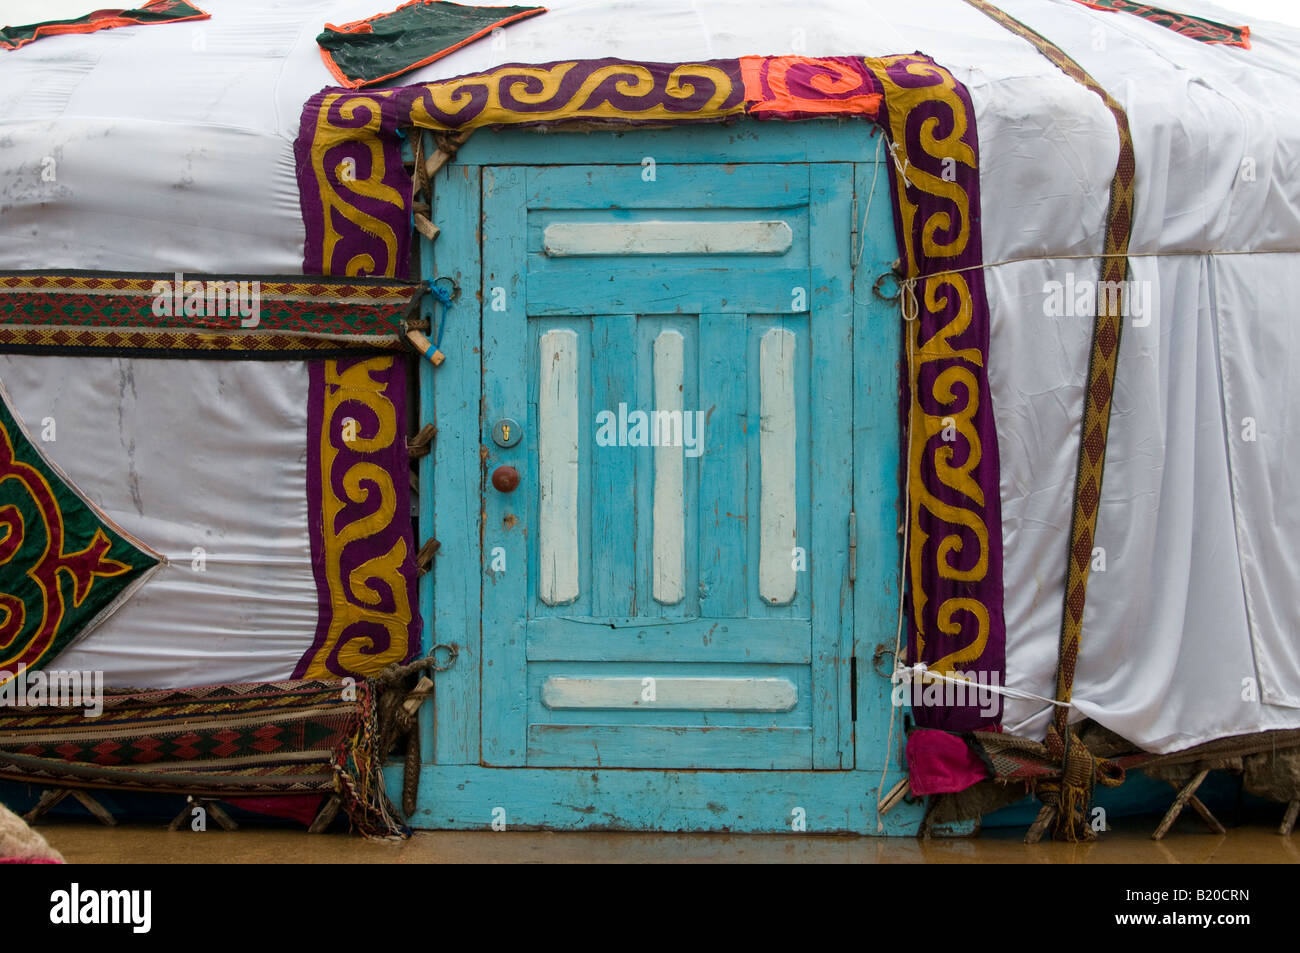 Doorway of a yurt a traditional portable round tent covered with skins or felt and used as a dwelling by nomads in Central Asia Stock Photo